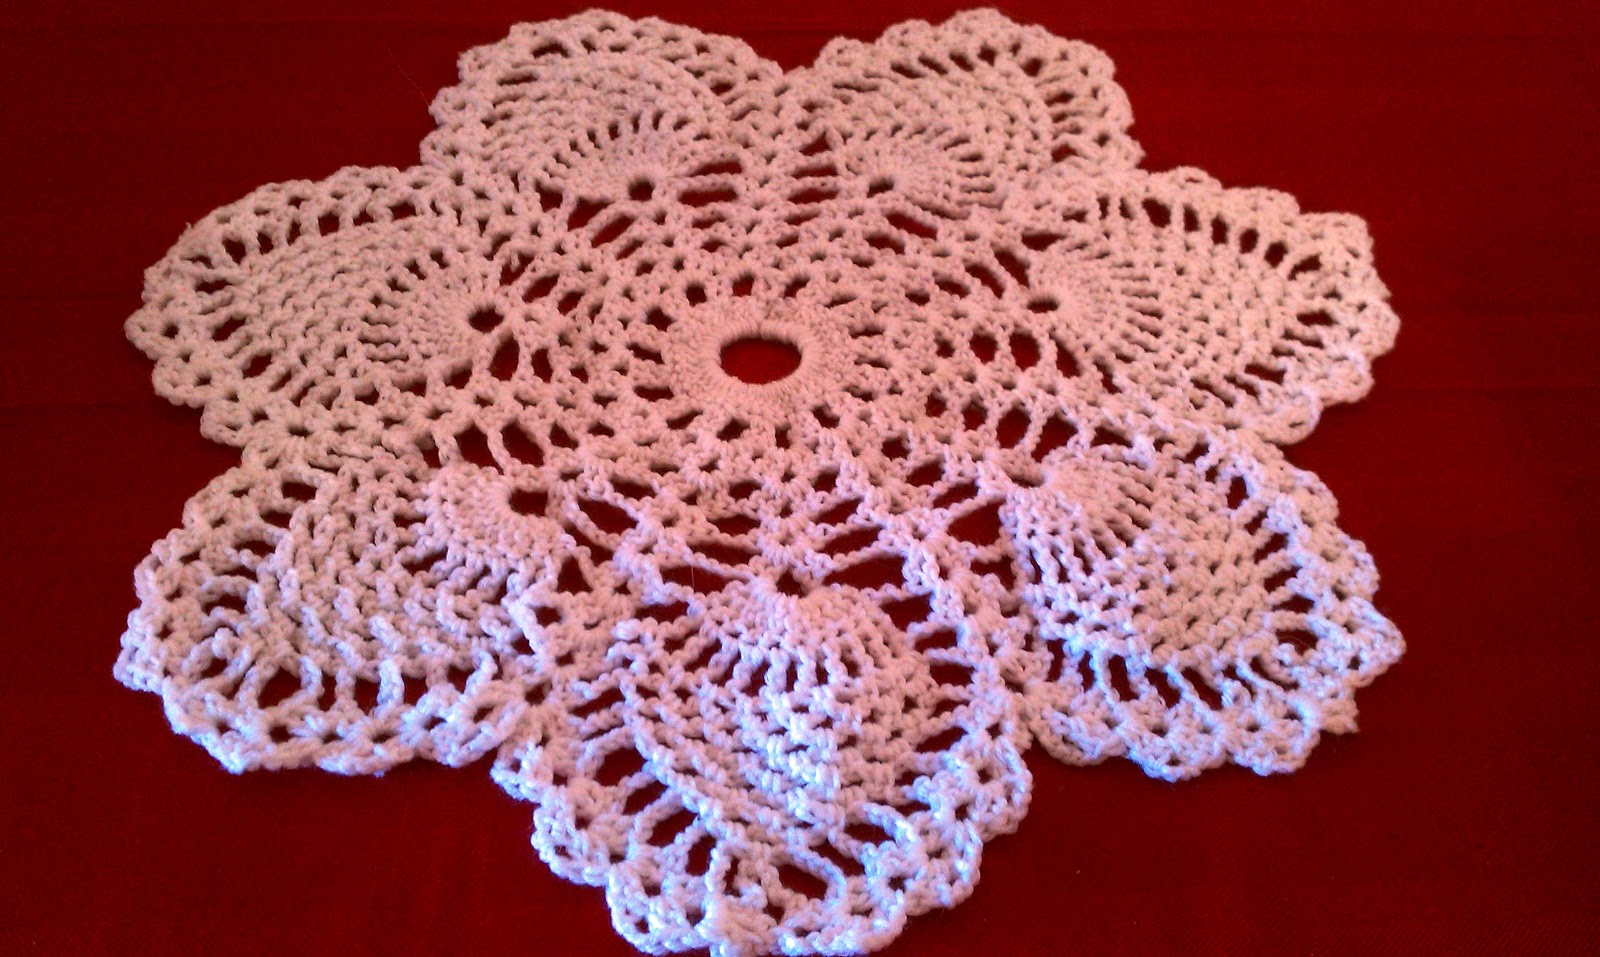 Crochet Centerpiece Pattern Janet Maries Crochet And Knit Projects And Free Patterns White